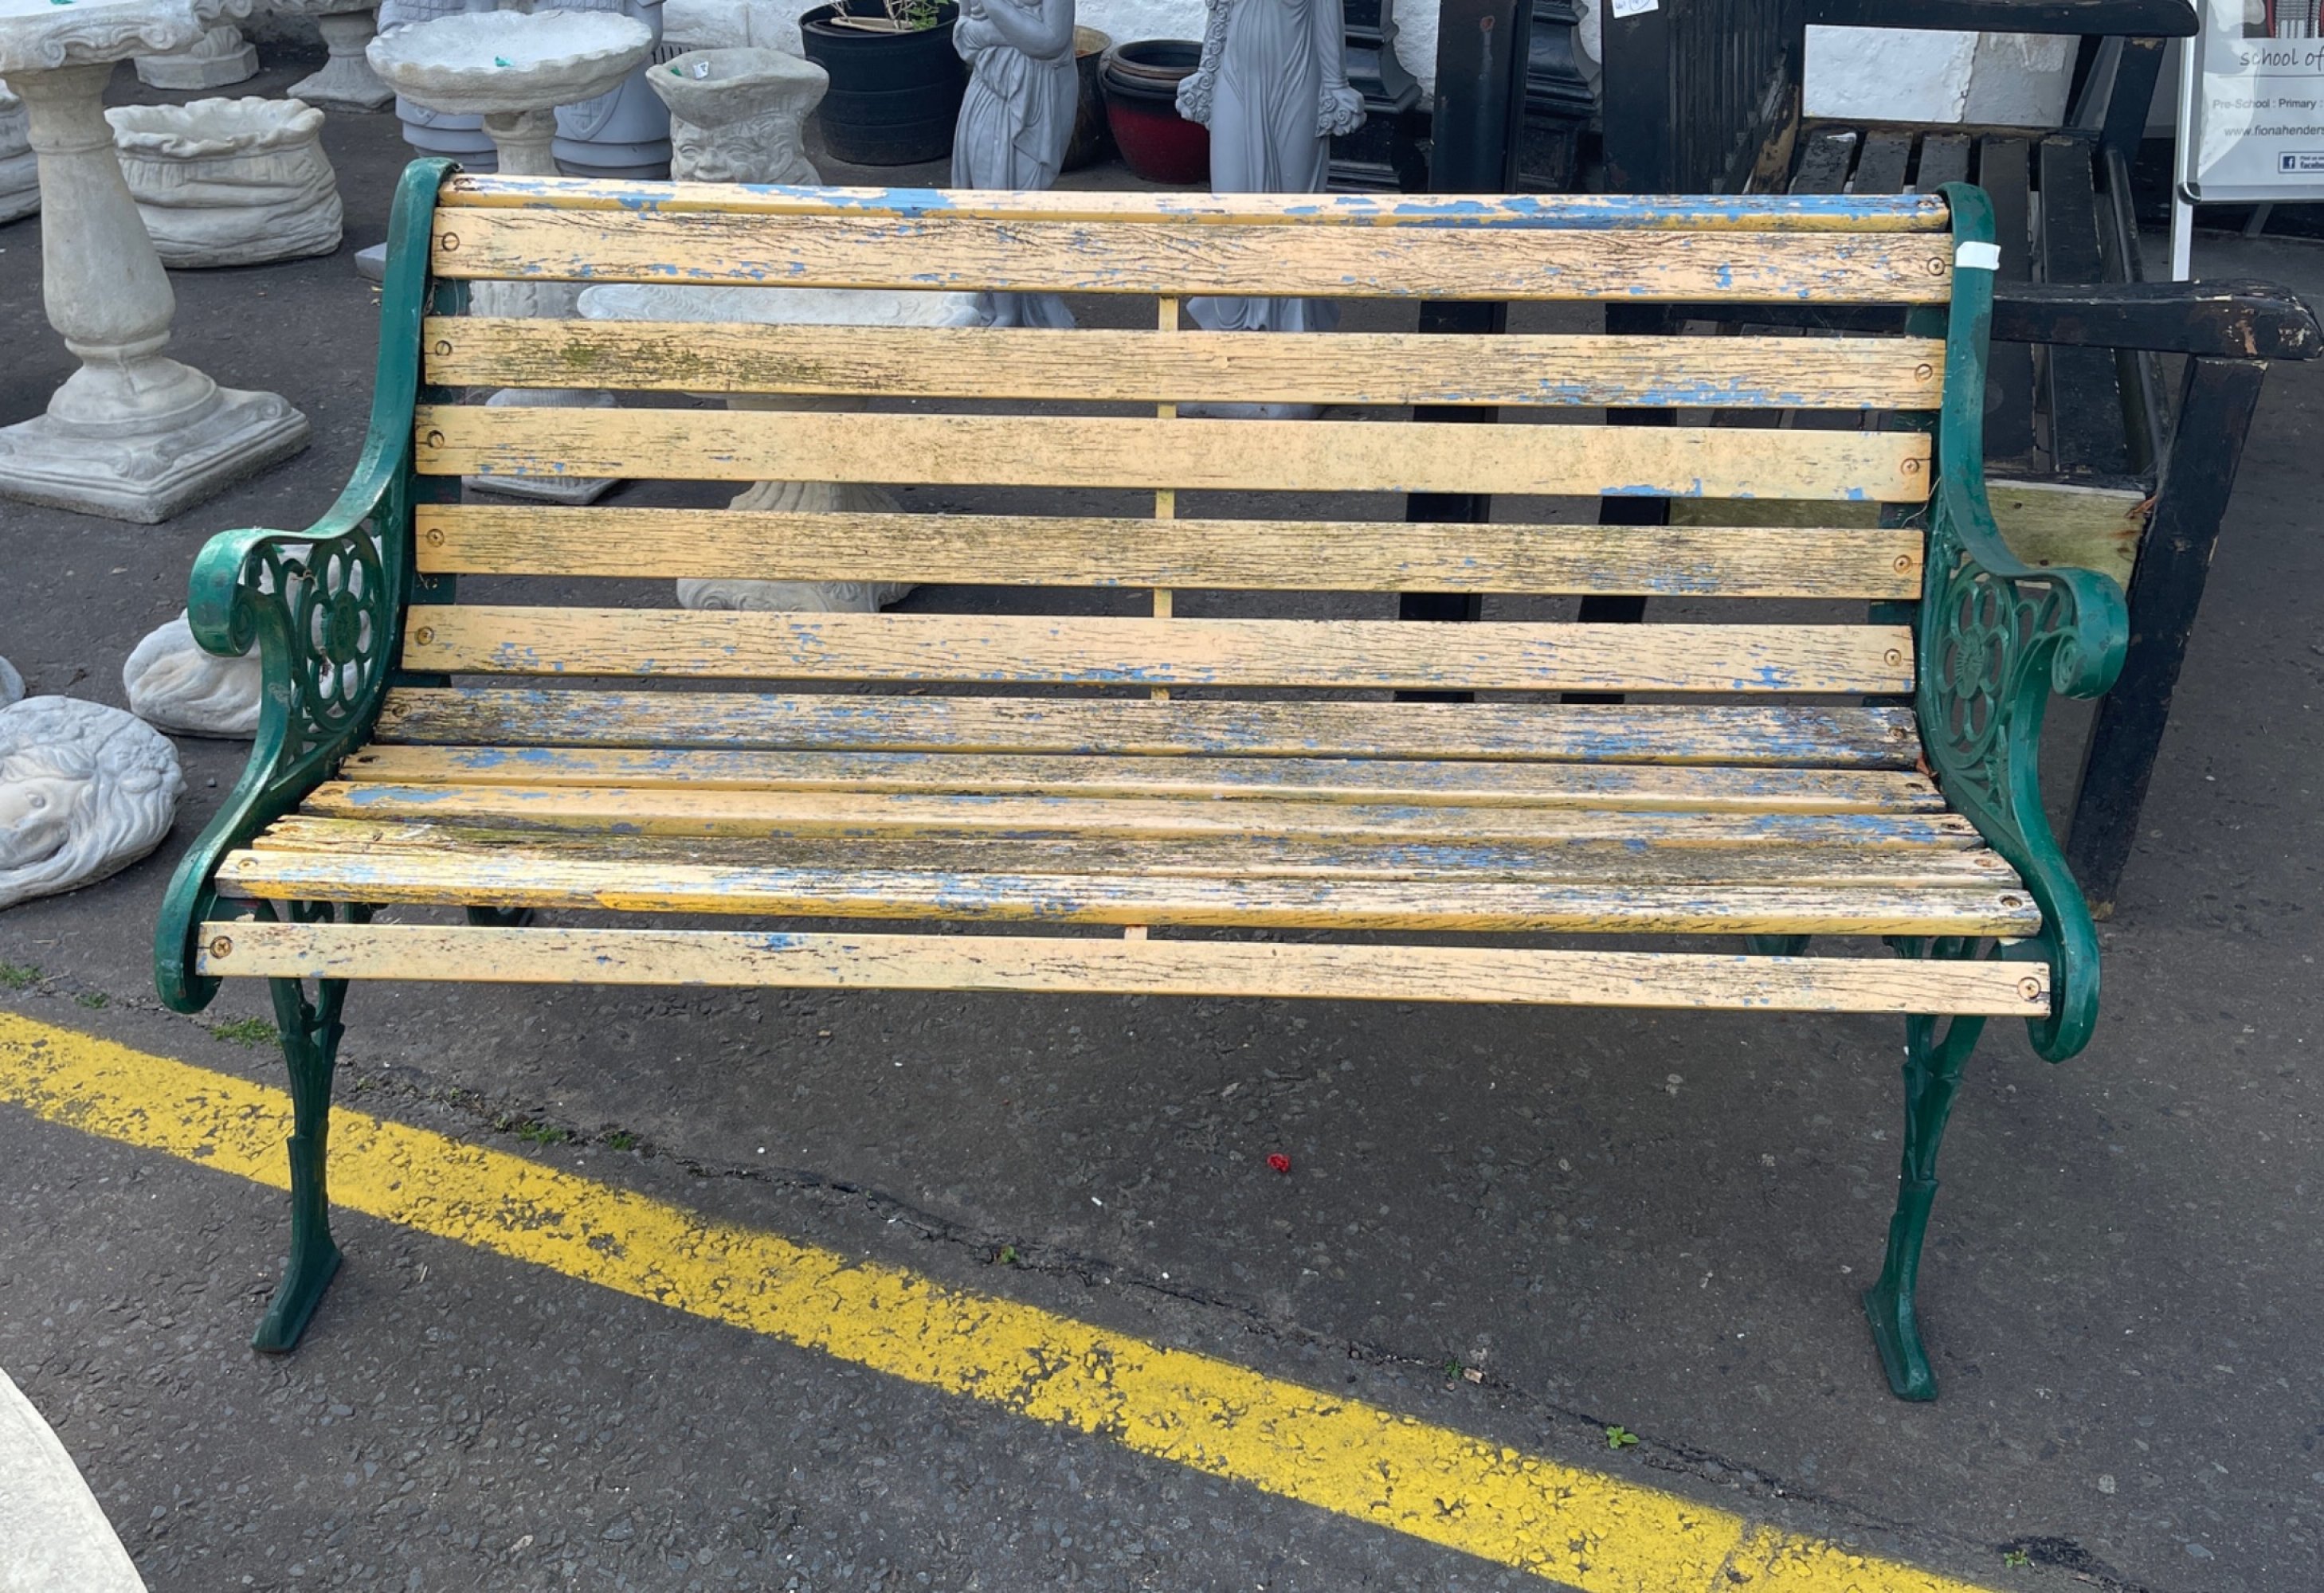 A nice wrought iron ended garden seat with distressed lemon painted wooden slats - 130cm long x